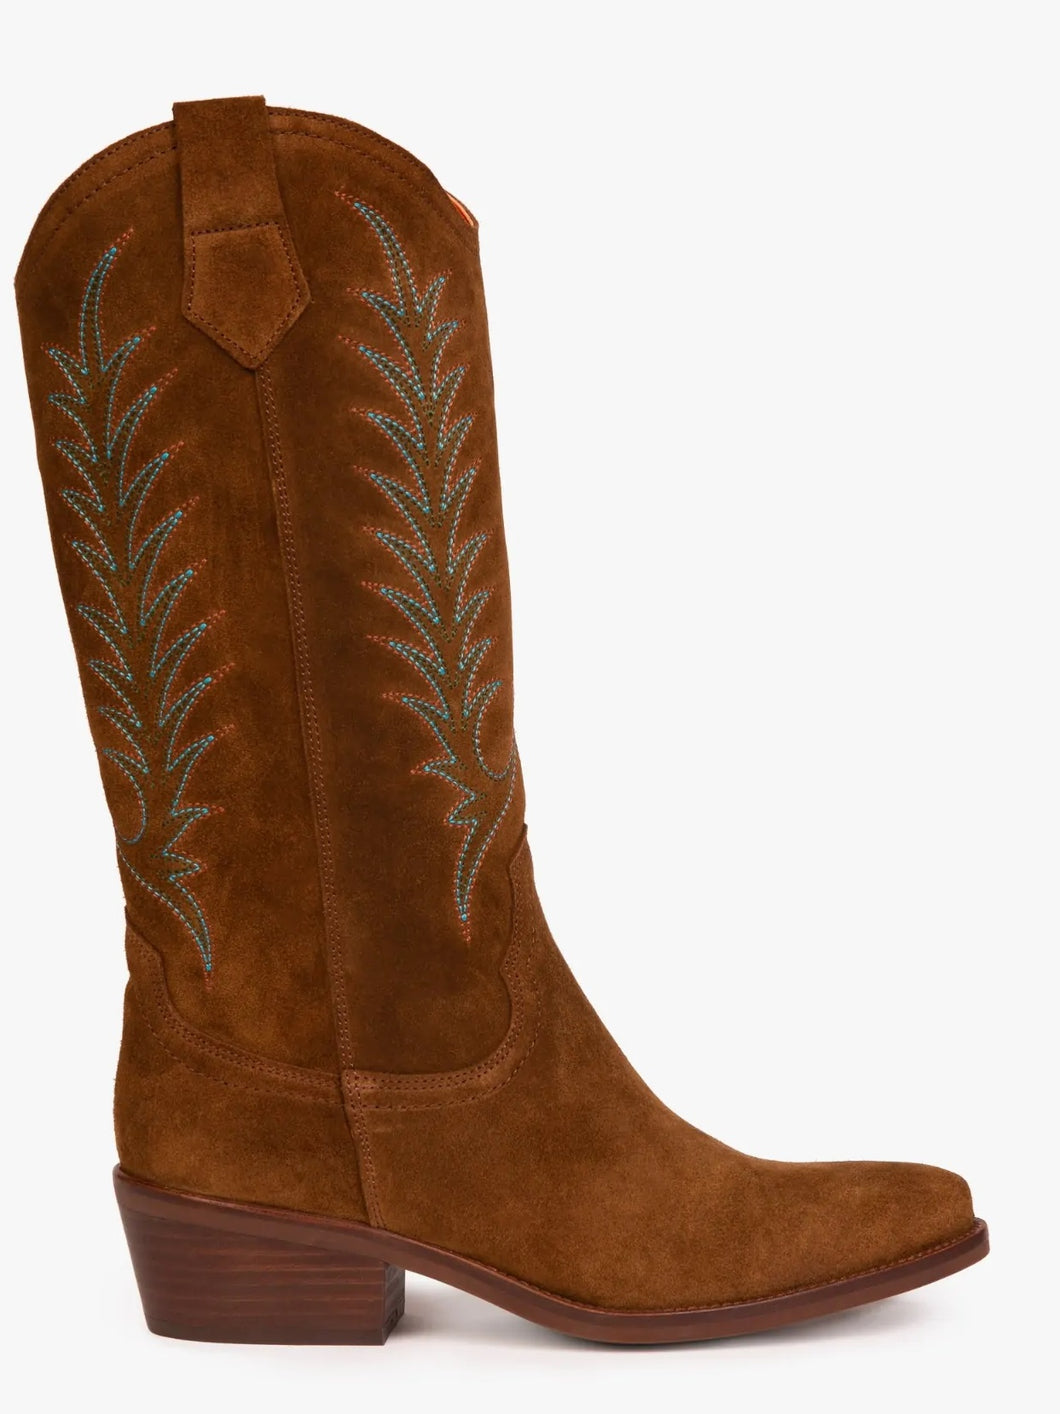 PENELOPE CHILVERS Goldie Embroidered Cowboy Boots - Ladies Suede - Peat